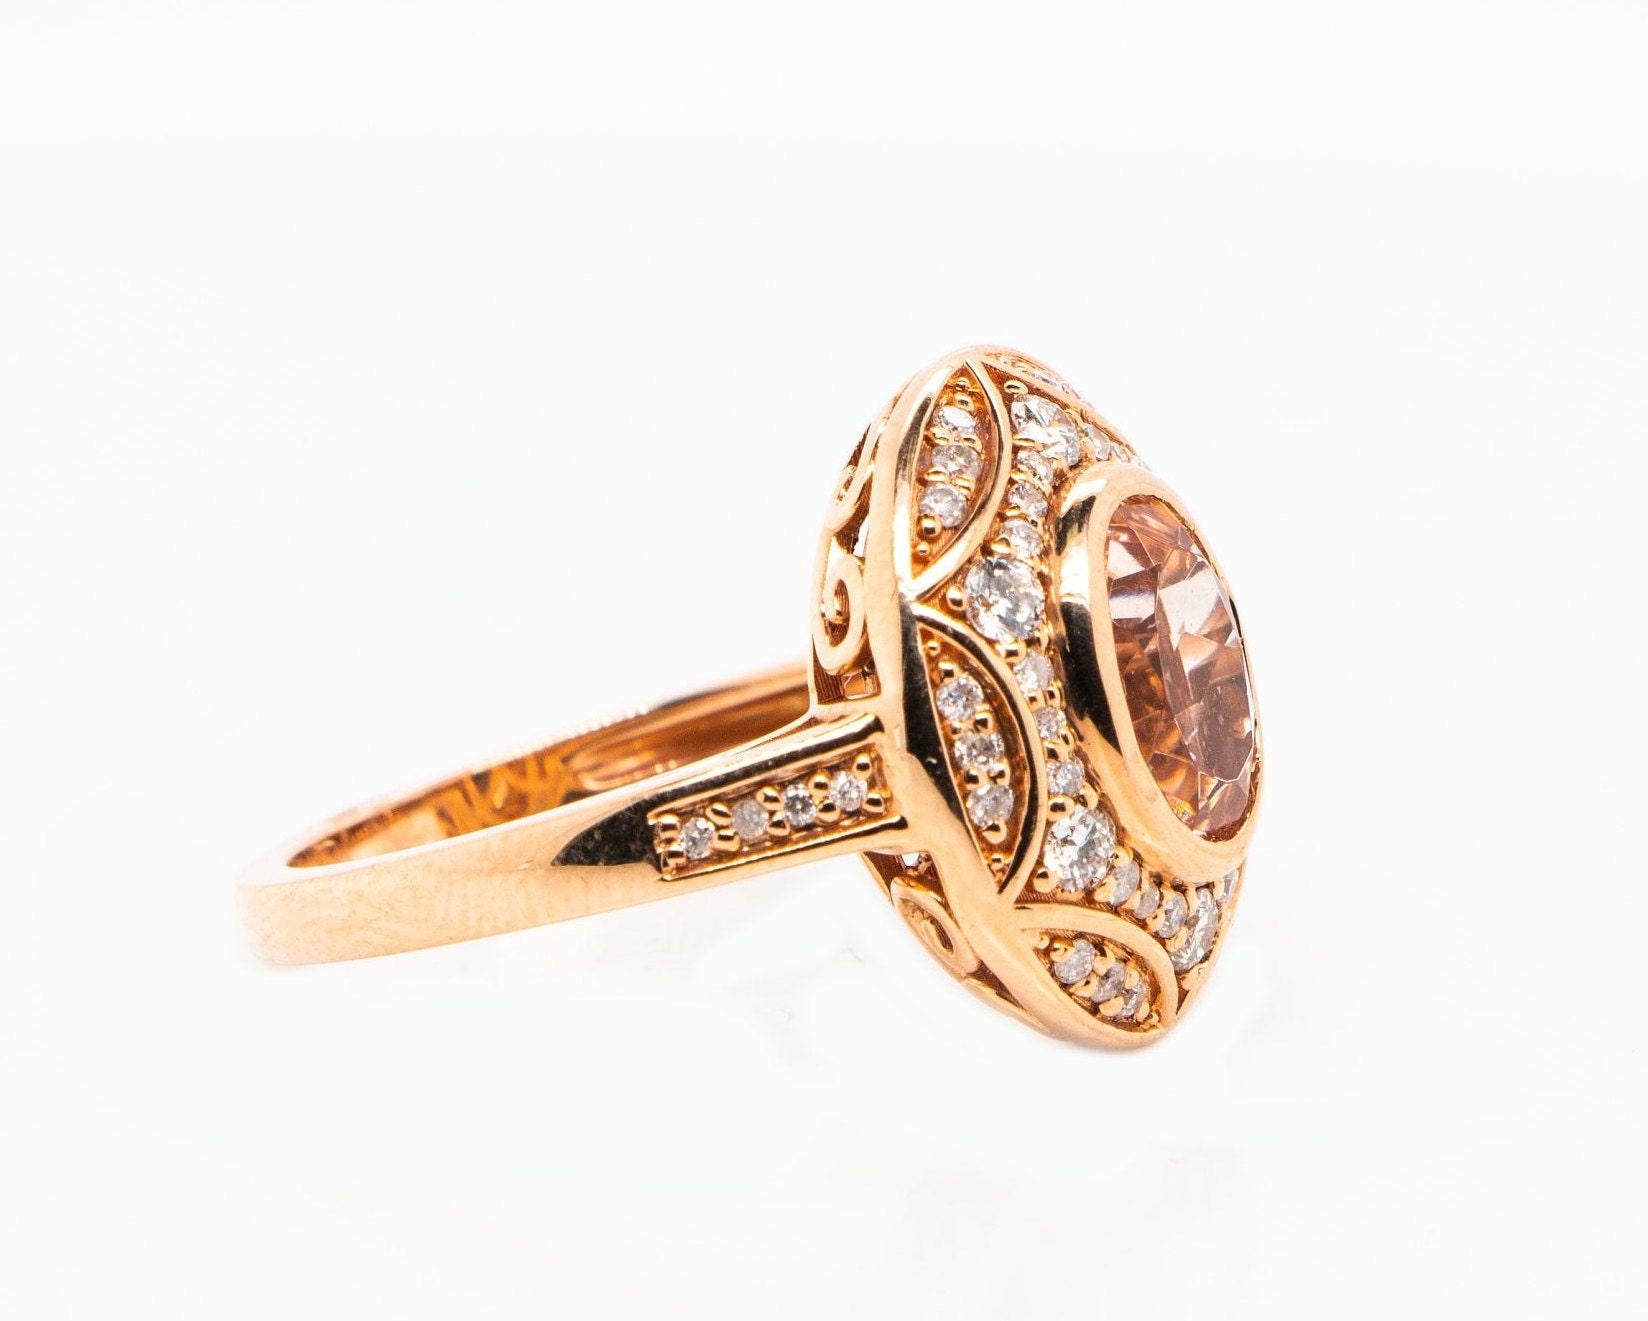 This is a magnificent natural 1.60carat morganite and diamond halo ring set in solid 14K rose gold. The natural and large 8X6MM Morganite oval has an excellent peachy pink color (AAA quality gem) and is set on top of a gorgeous diamond-encrusted